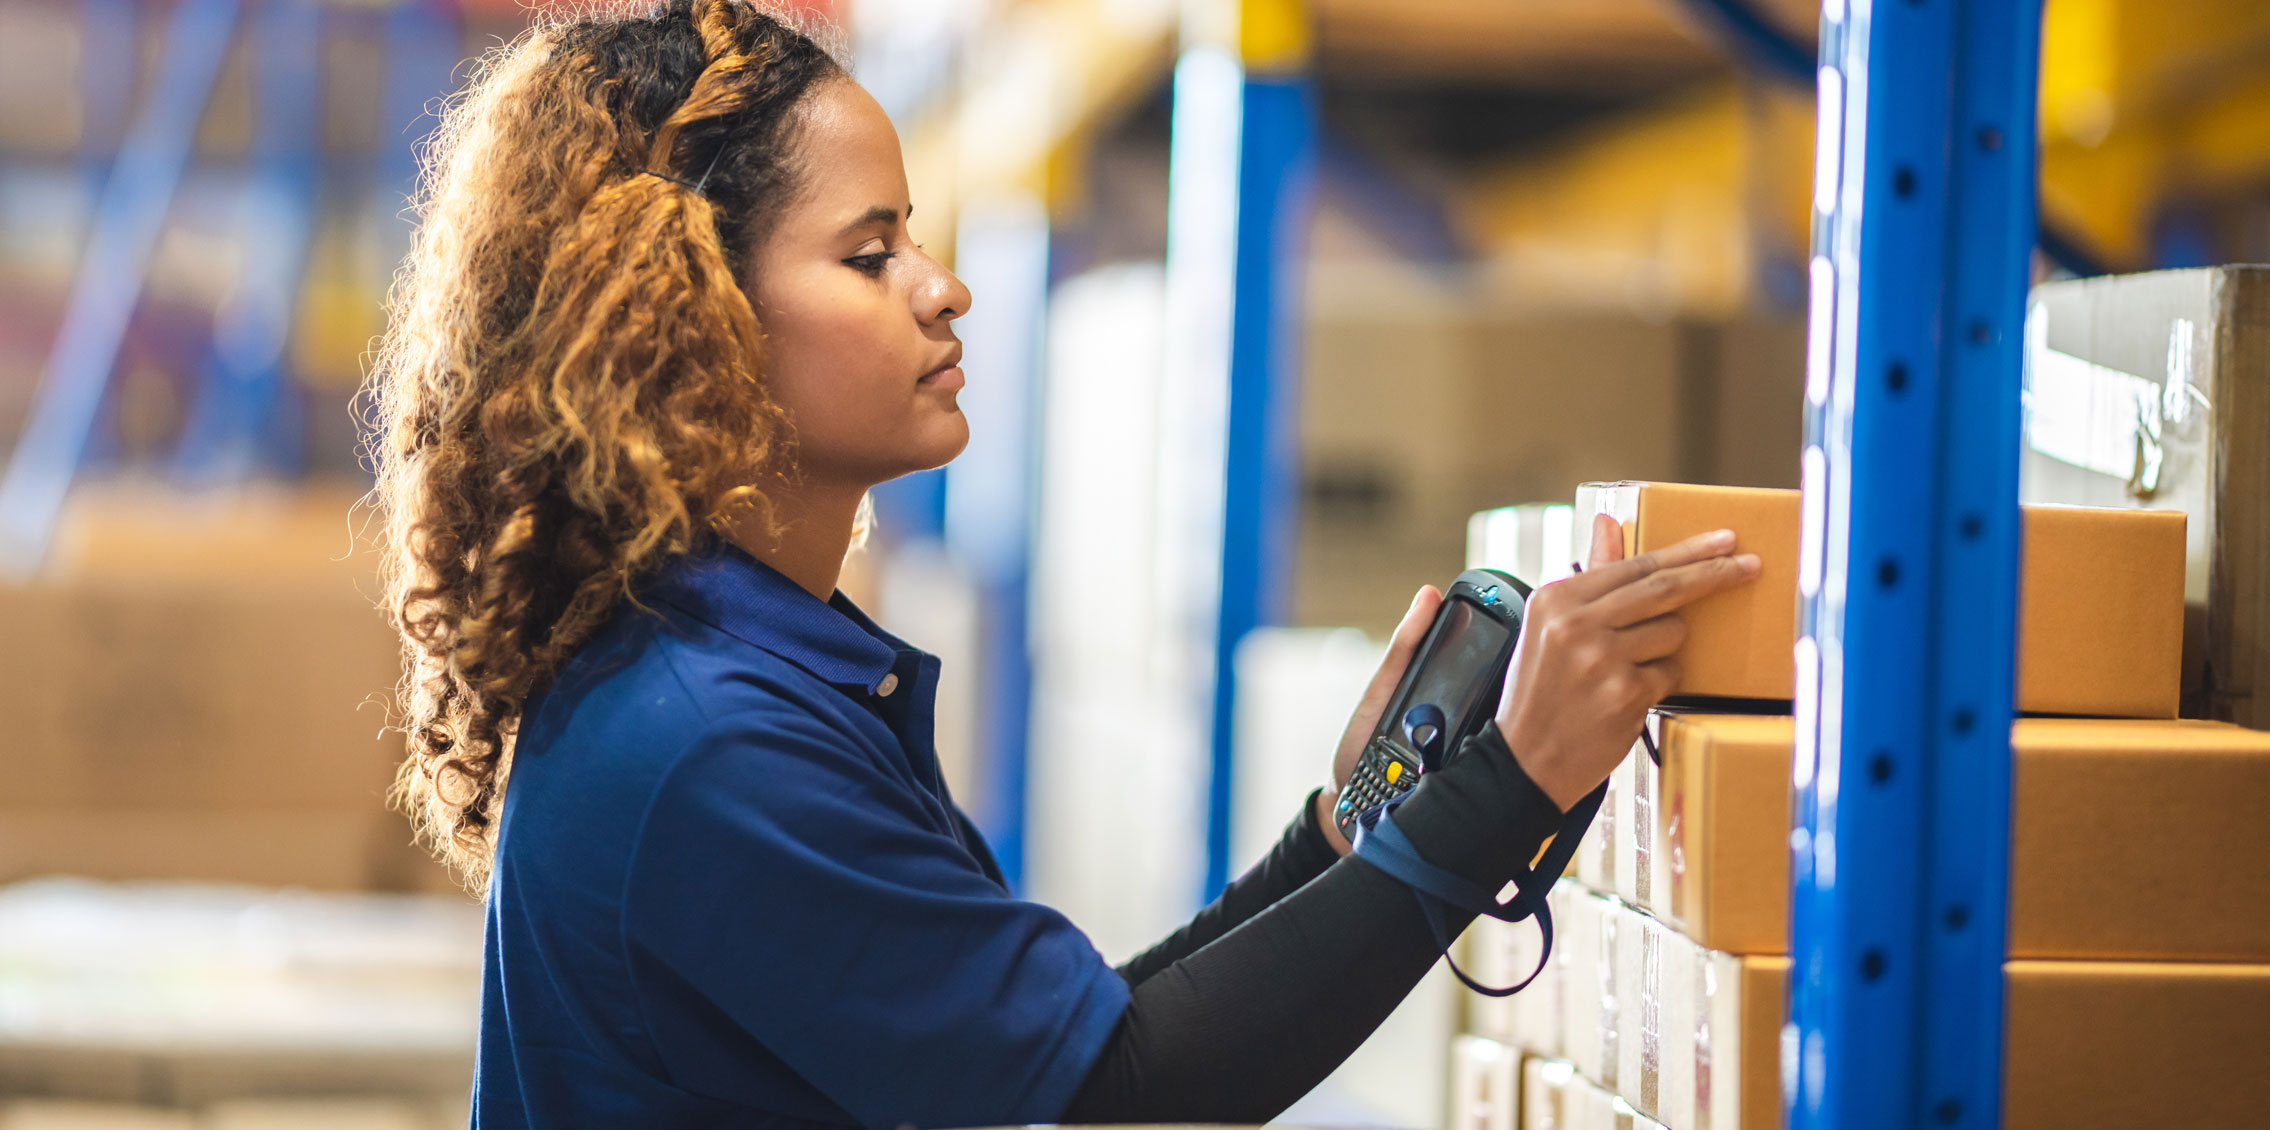 female distribution employee scanning pricing code to determine different pricing strategies